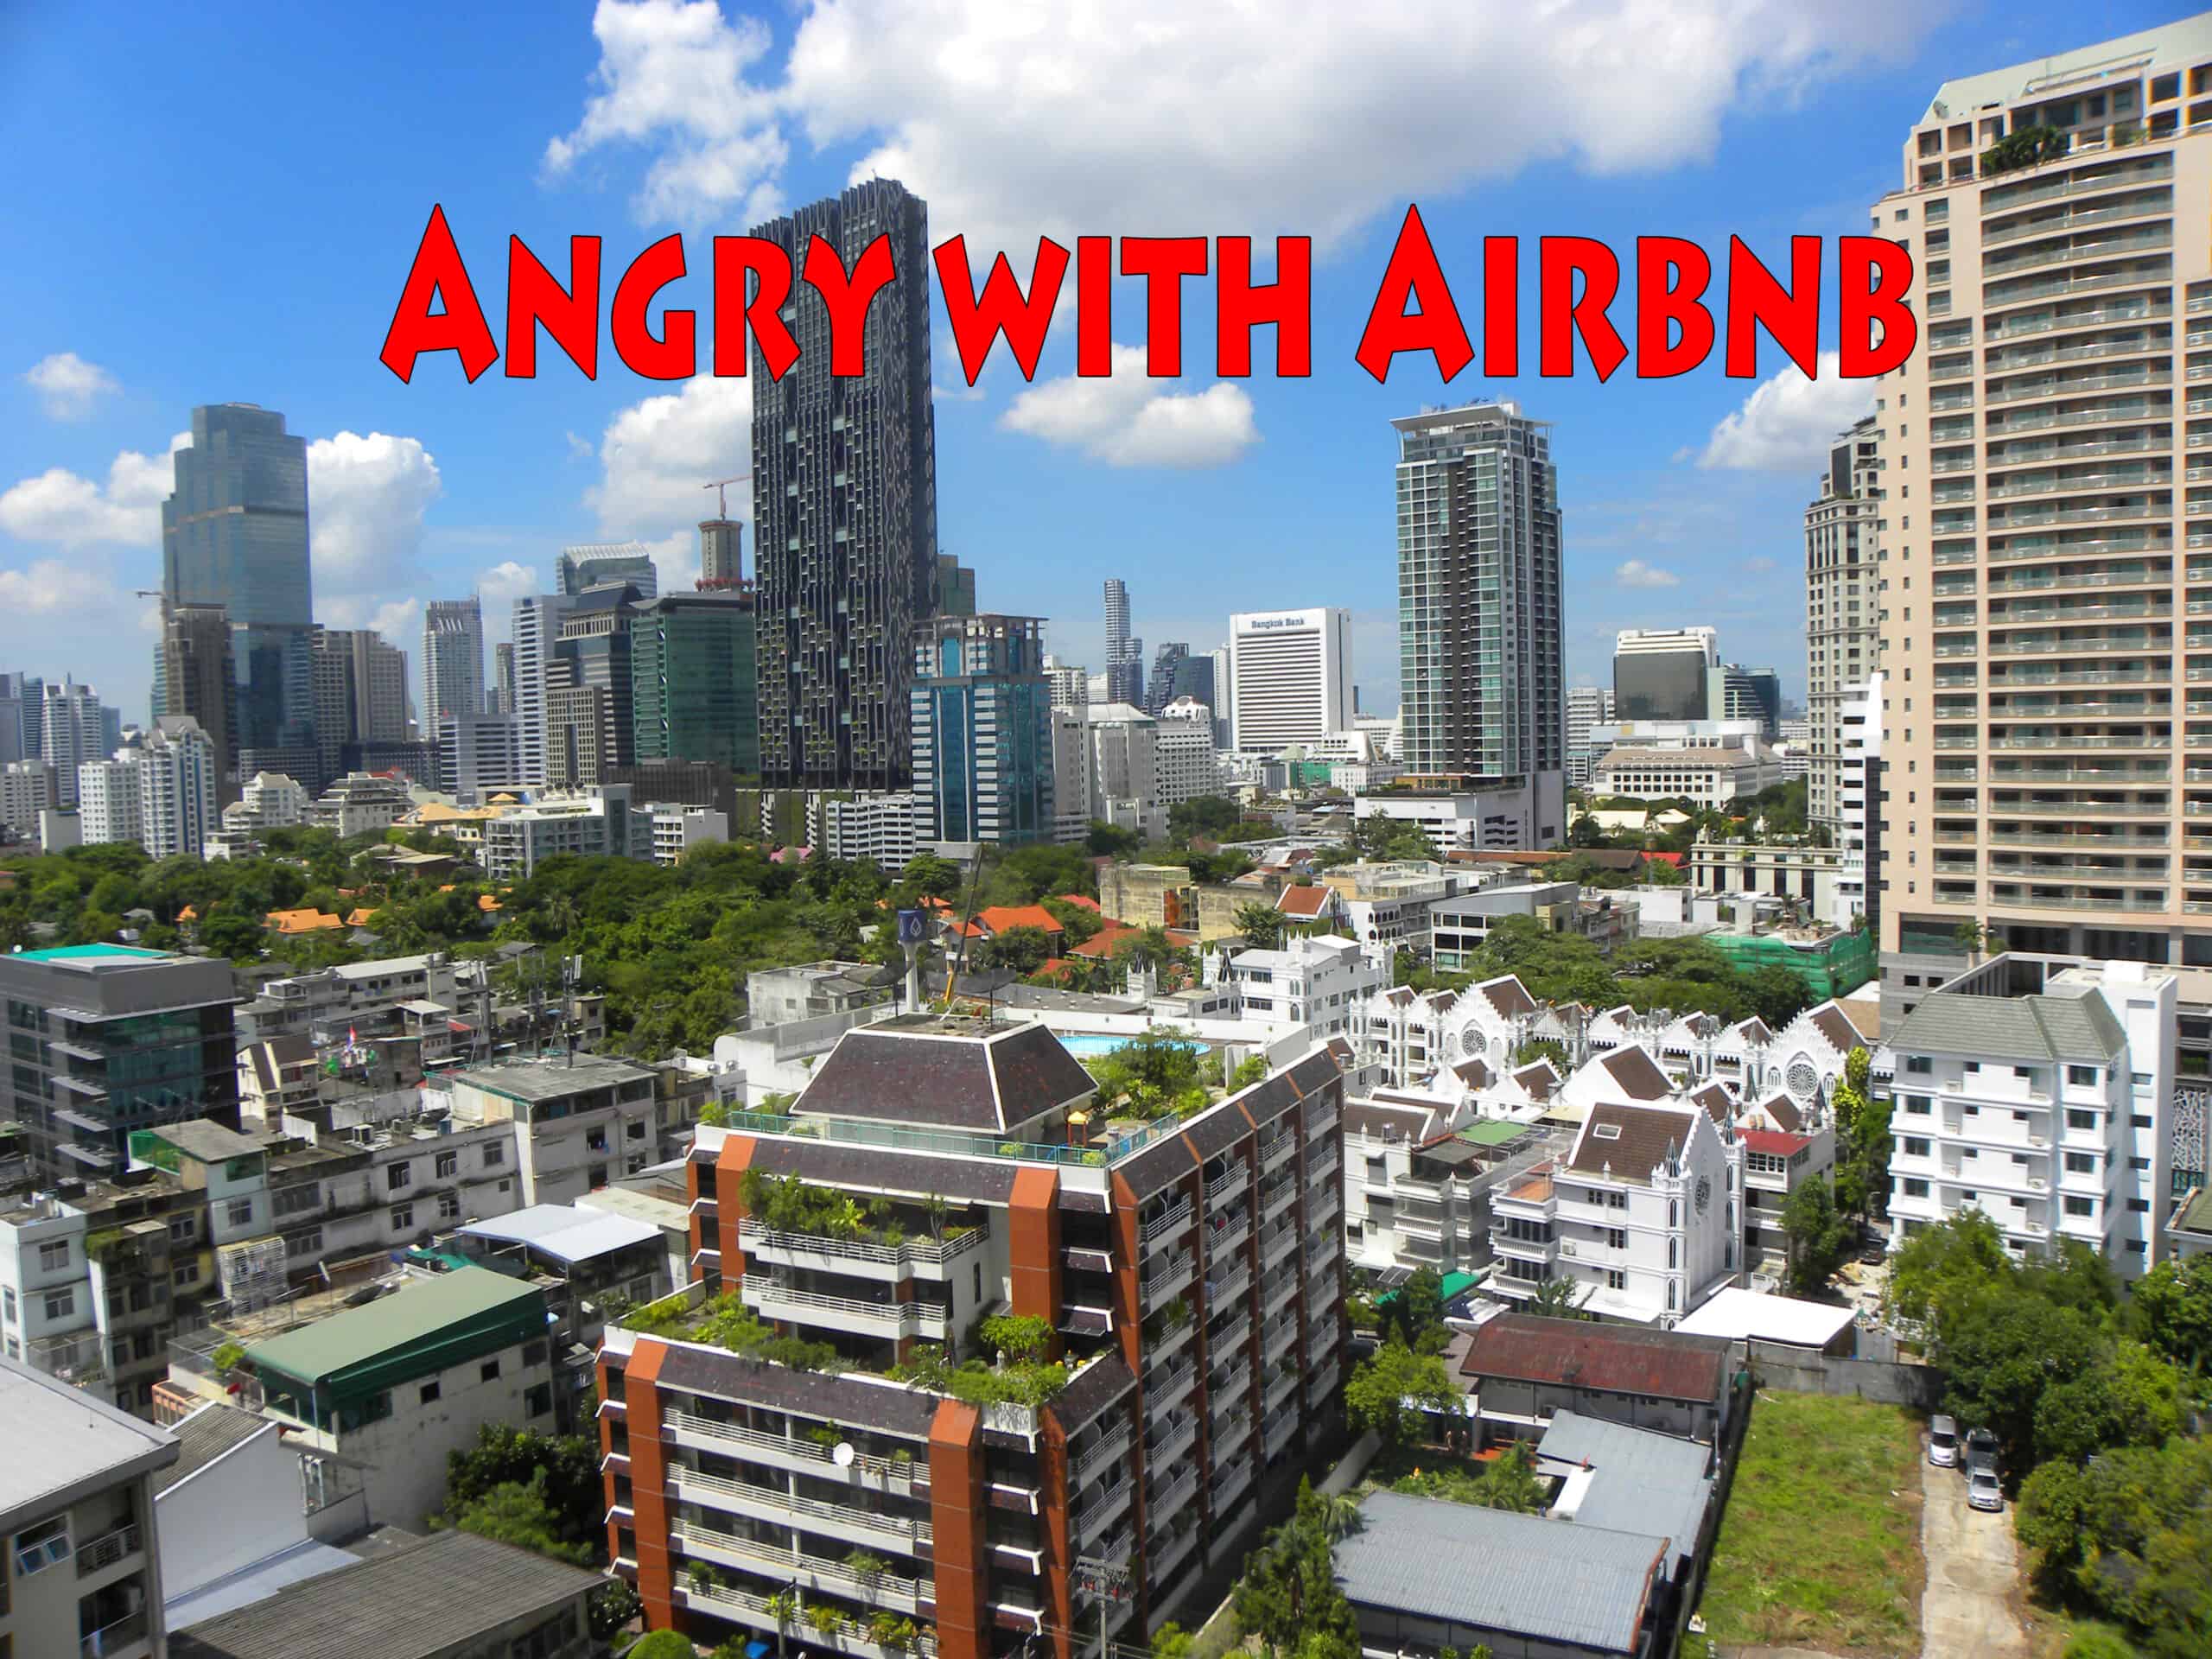 Angry with Airbnb